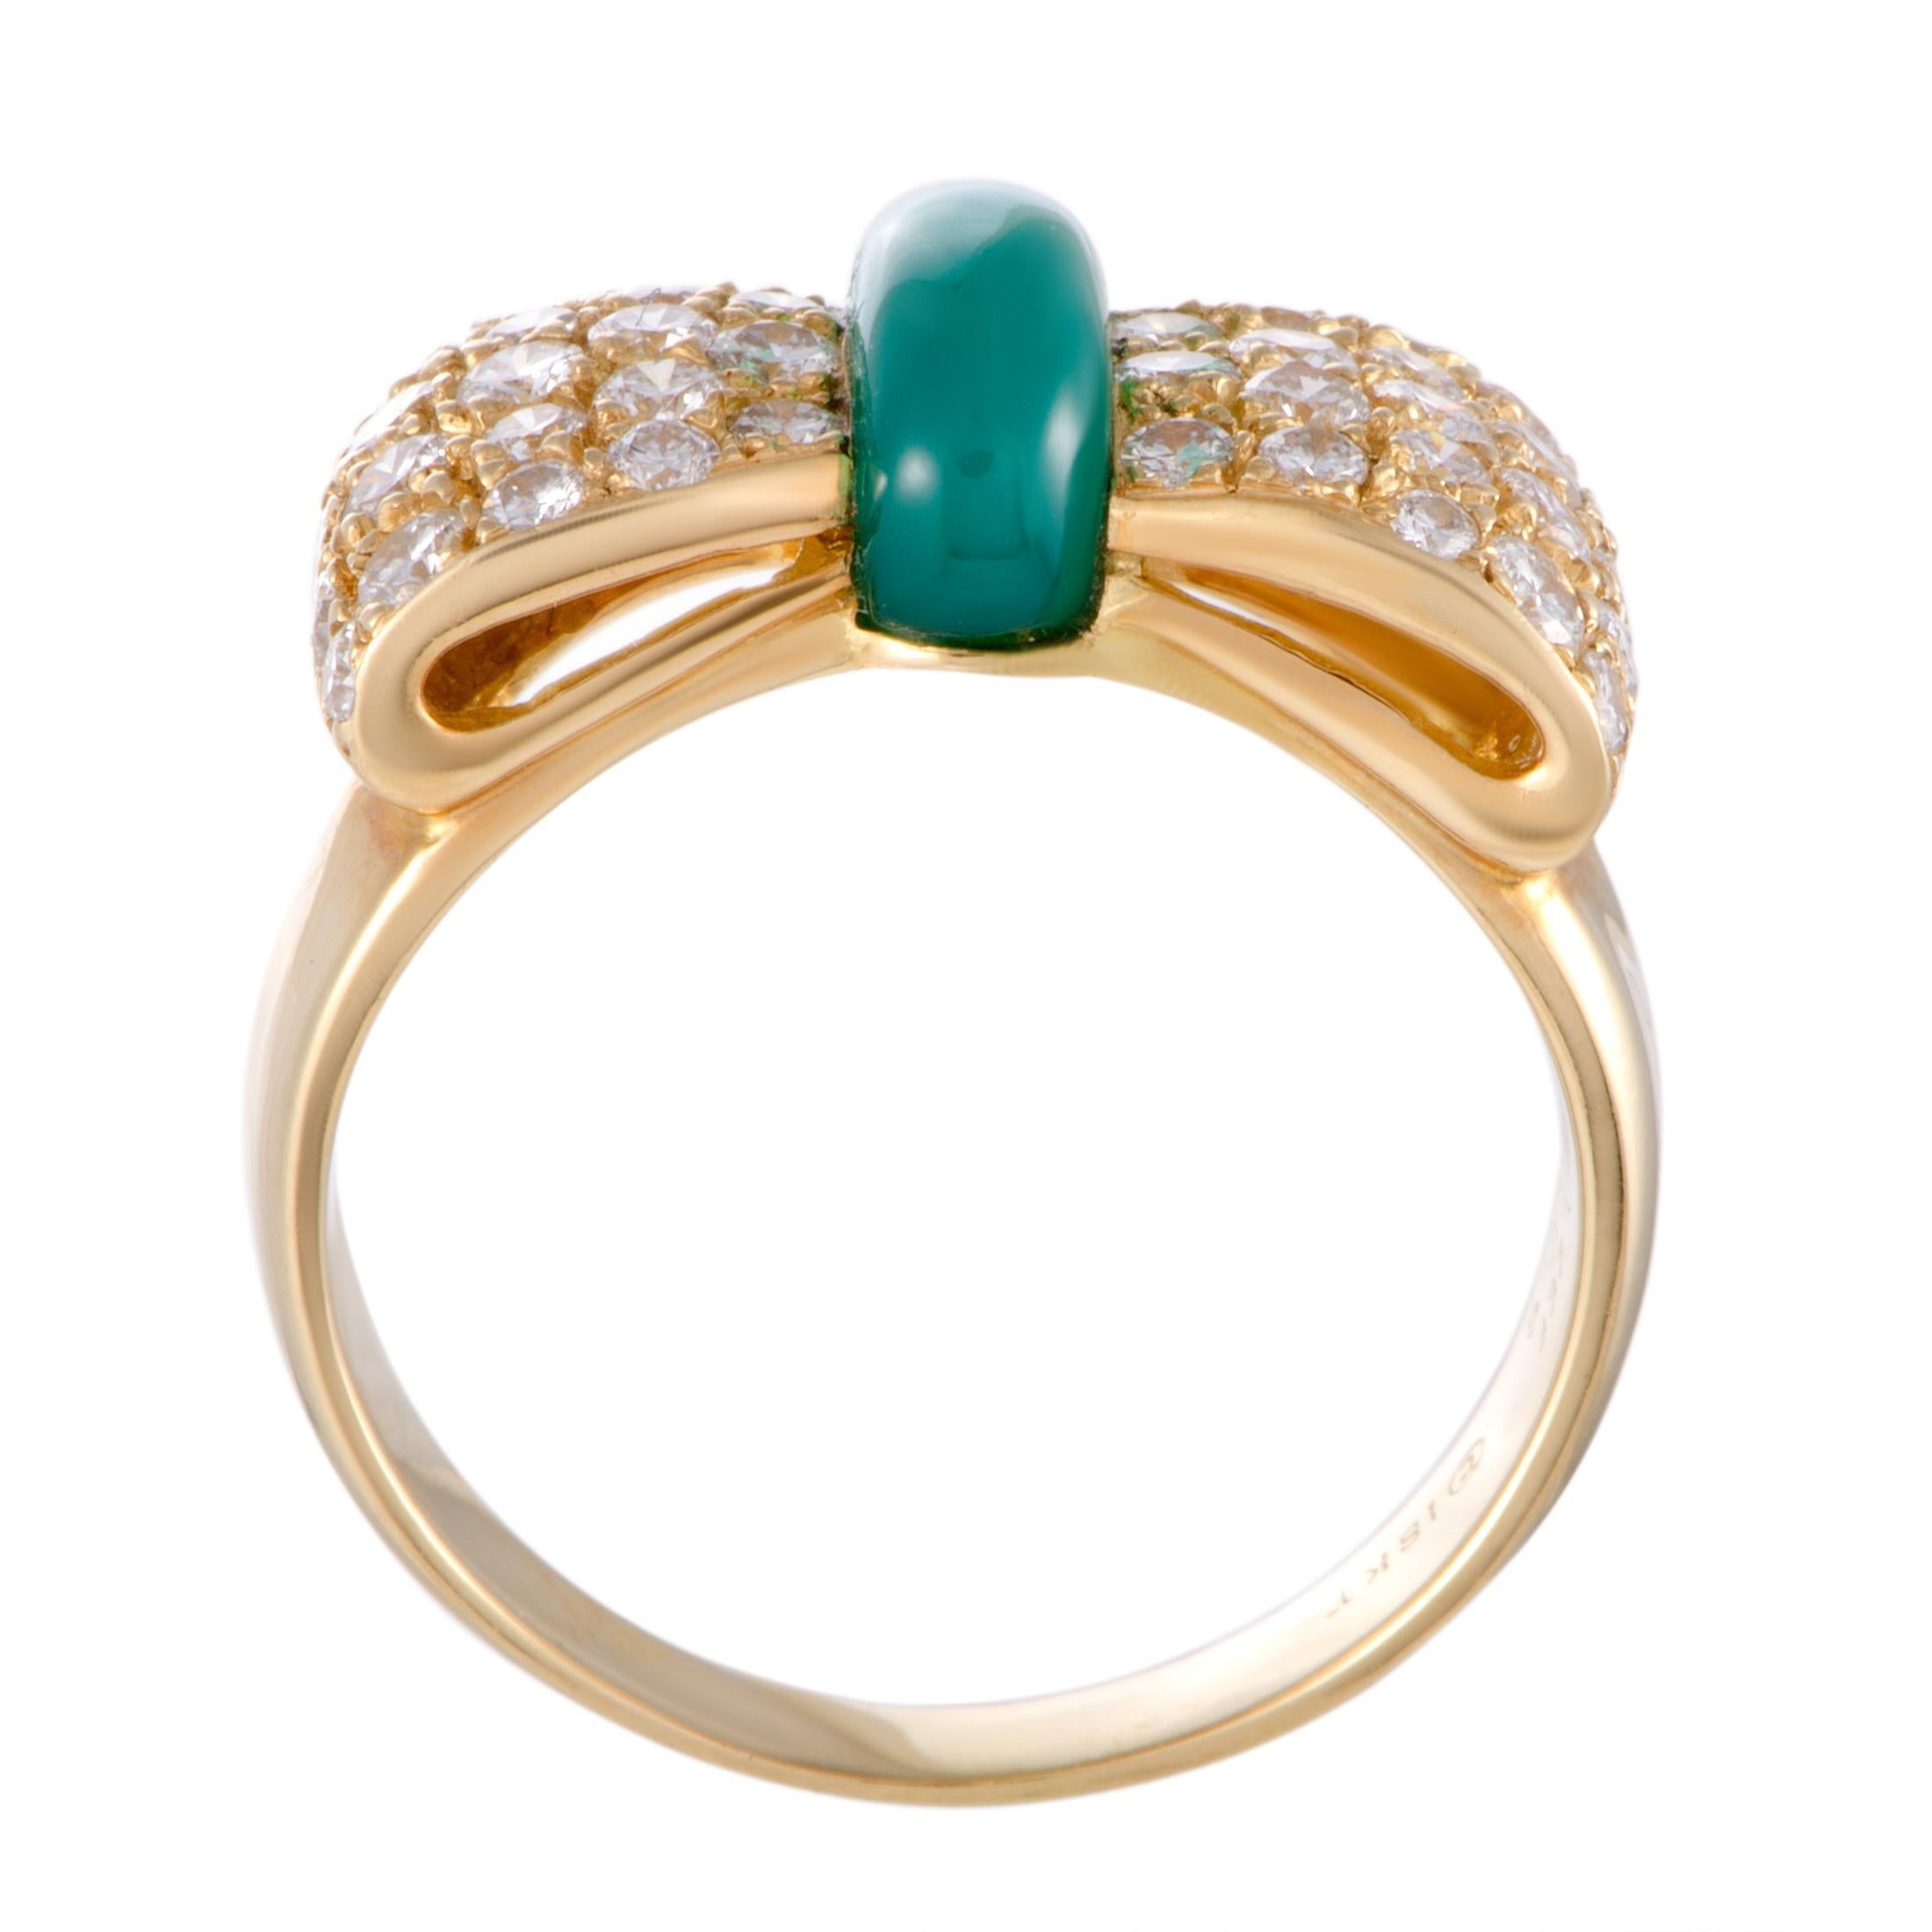 The luxurious sheen of 18K yellow gold and the lustrous resplendence of diamond stones wonderfully bring out the alluring beauty of the green chalcedony in this charming ring. The ring is a Van Cleef & Arpels design and it boasts a total of